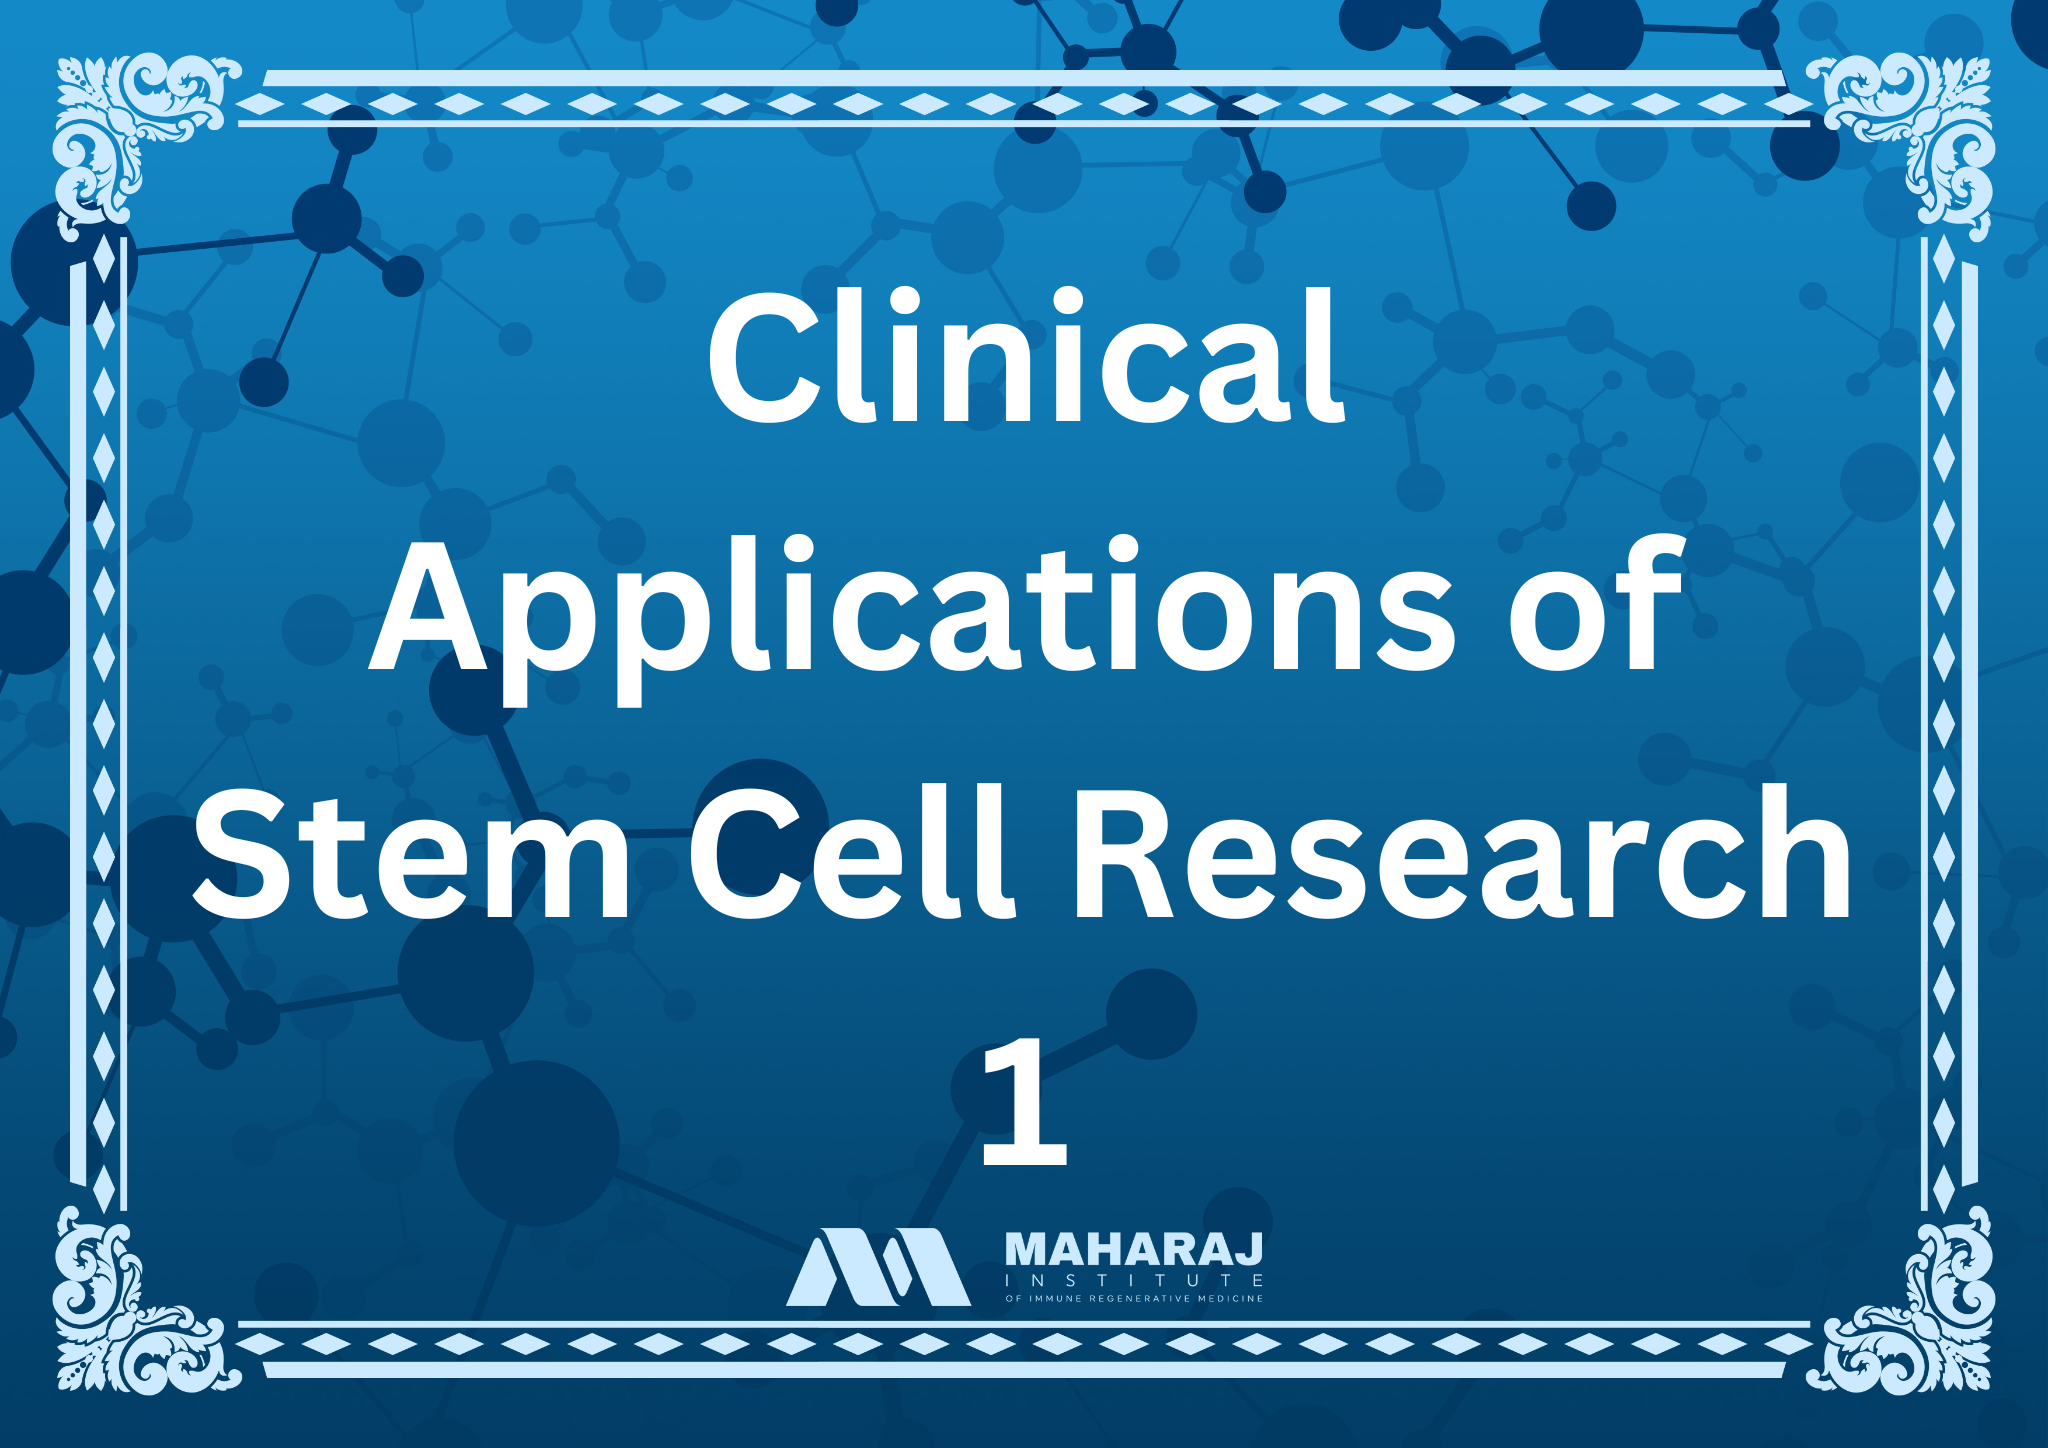 Clinical Applications of Stem Cell Research 1